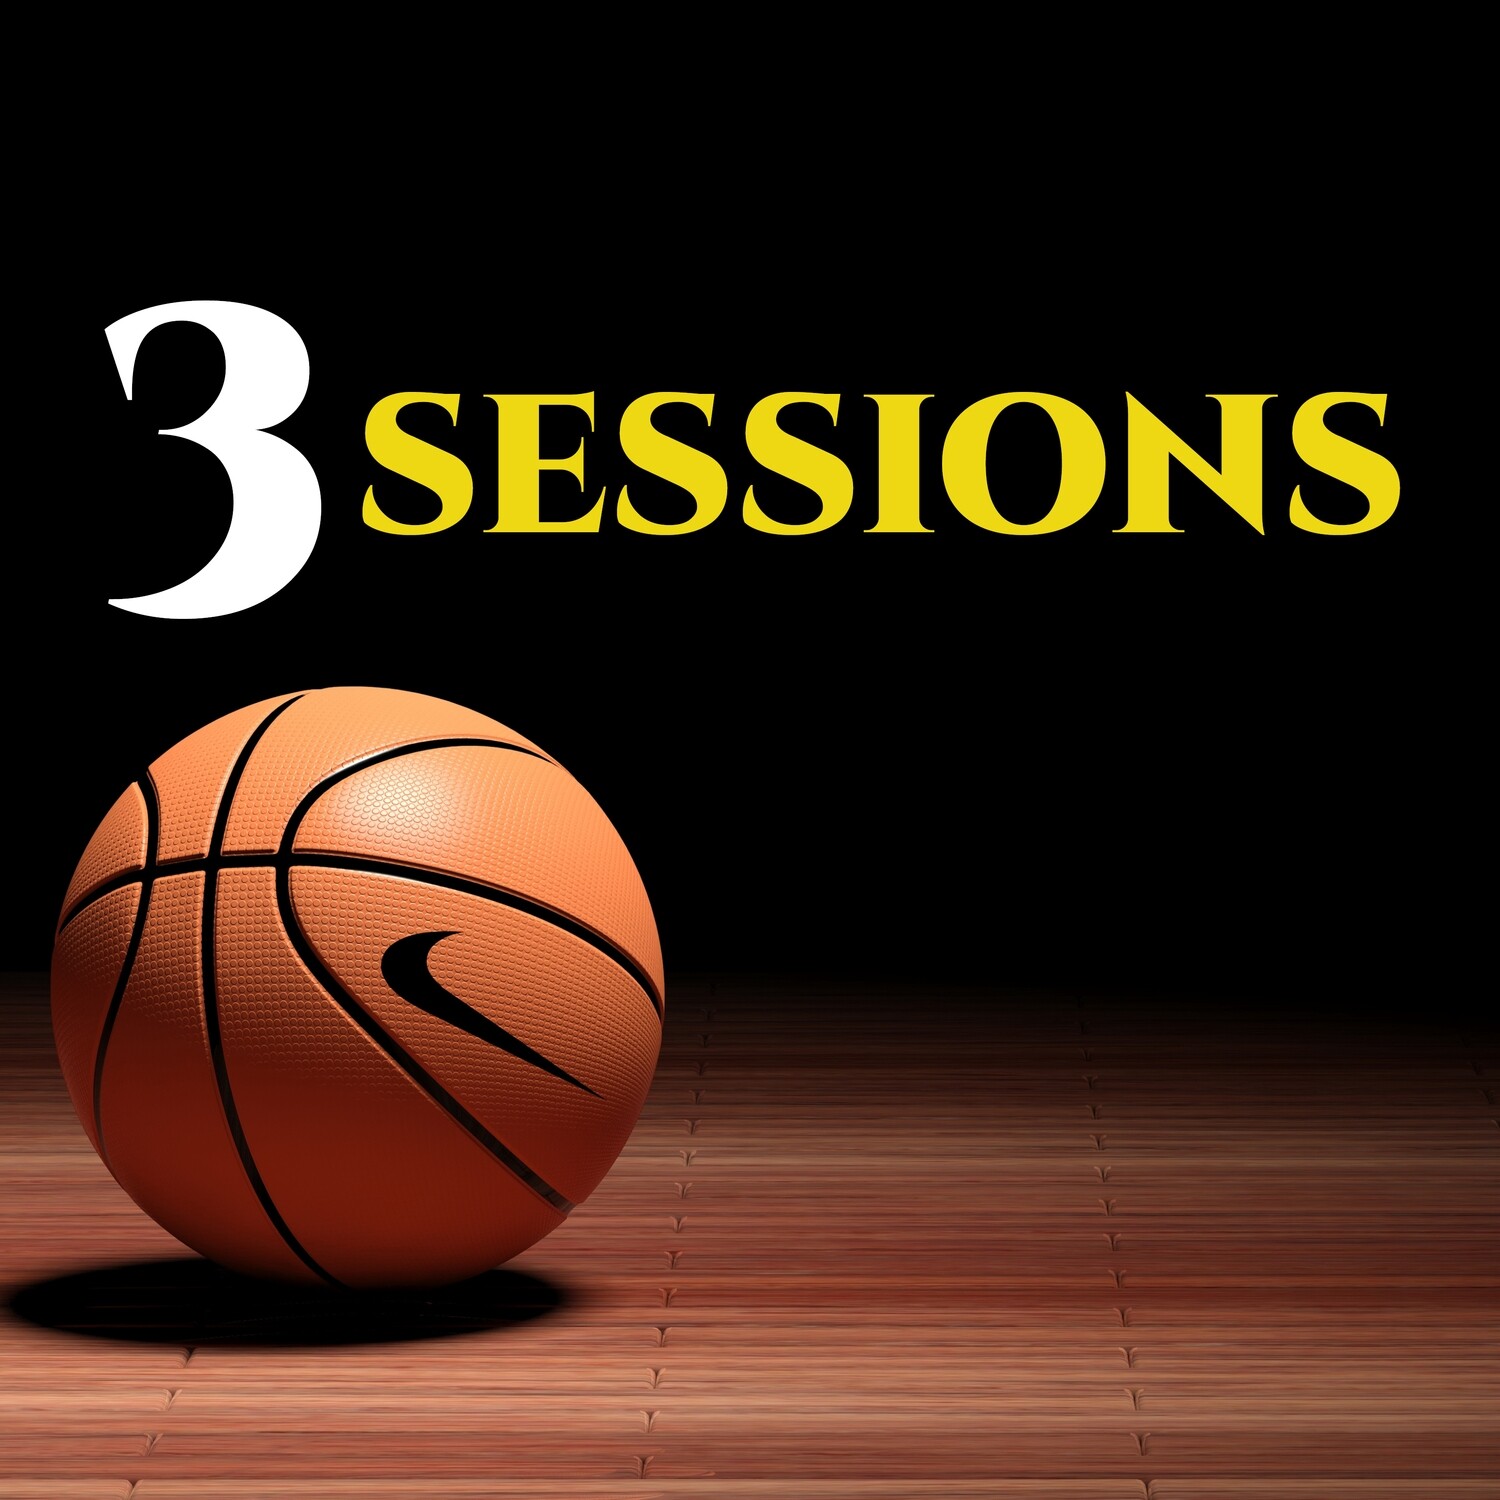 3 Sessions